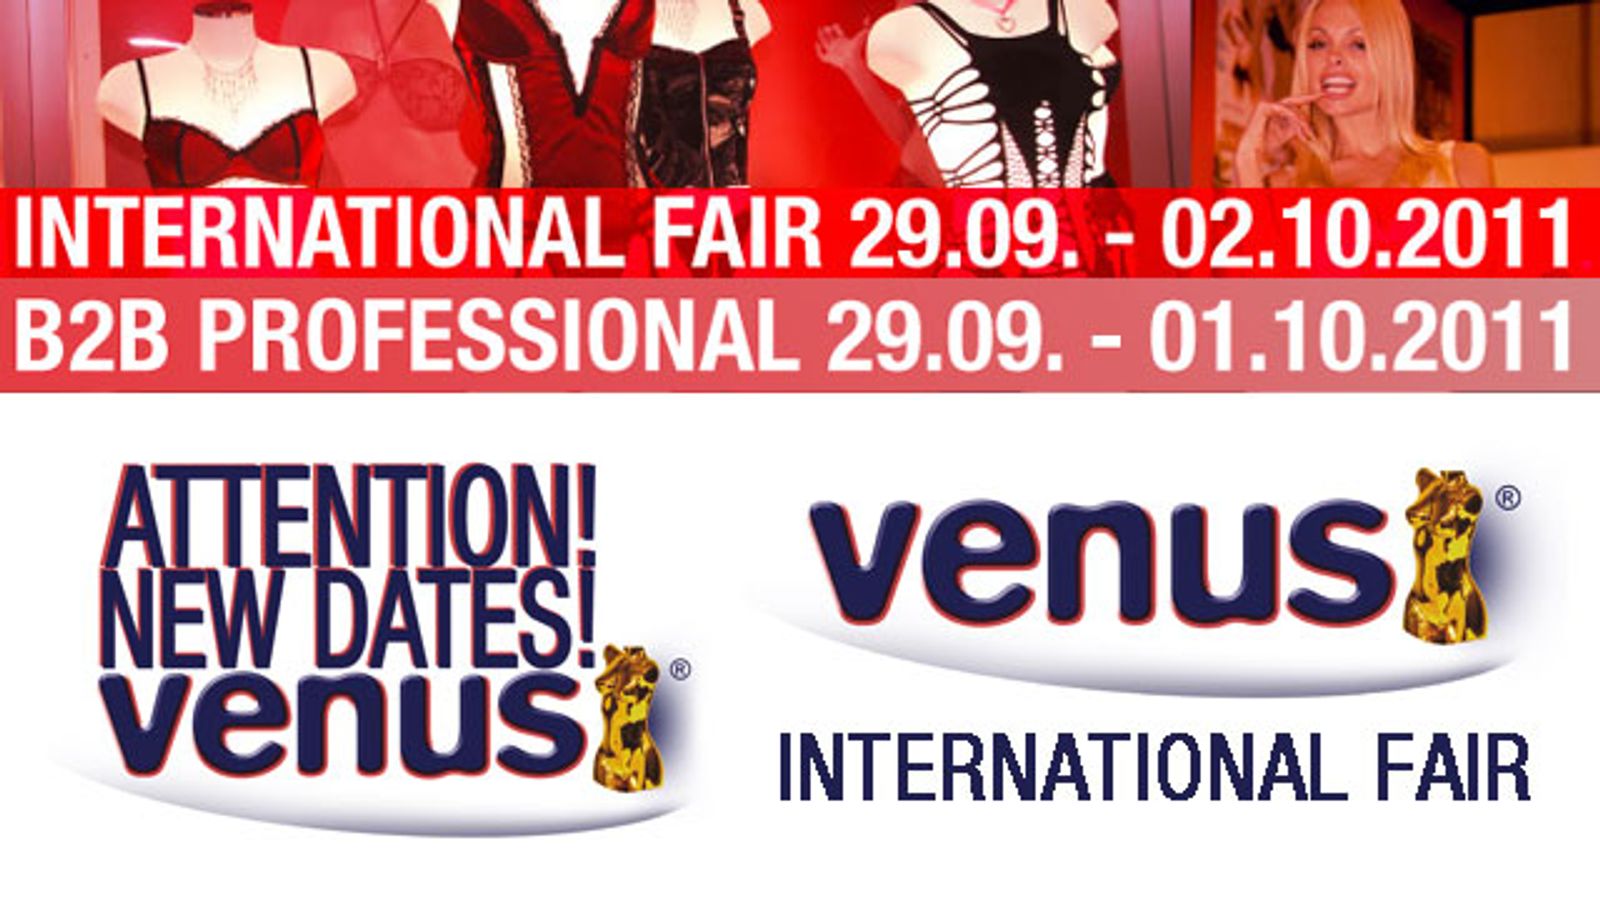 Venus 2011 Pushed Back by One Week to Sept. 29-Oct. 2